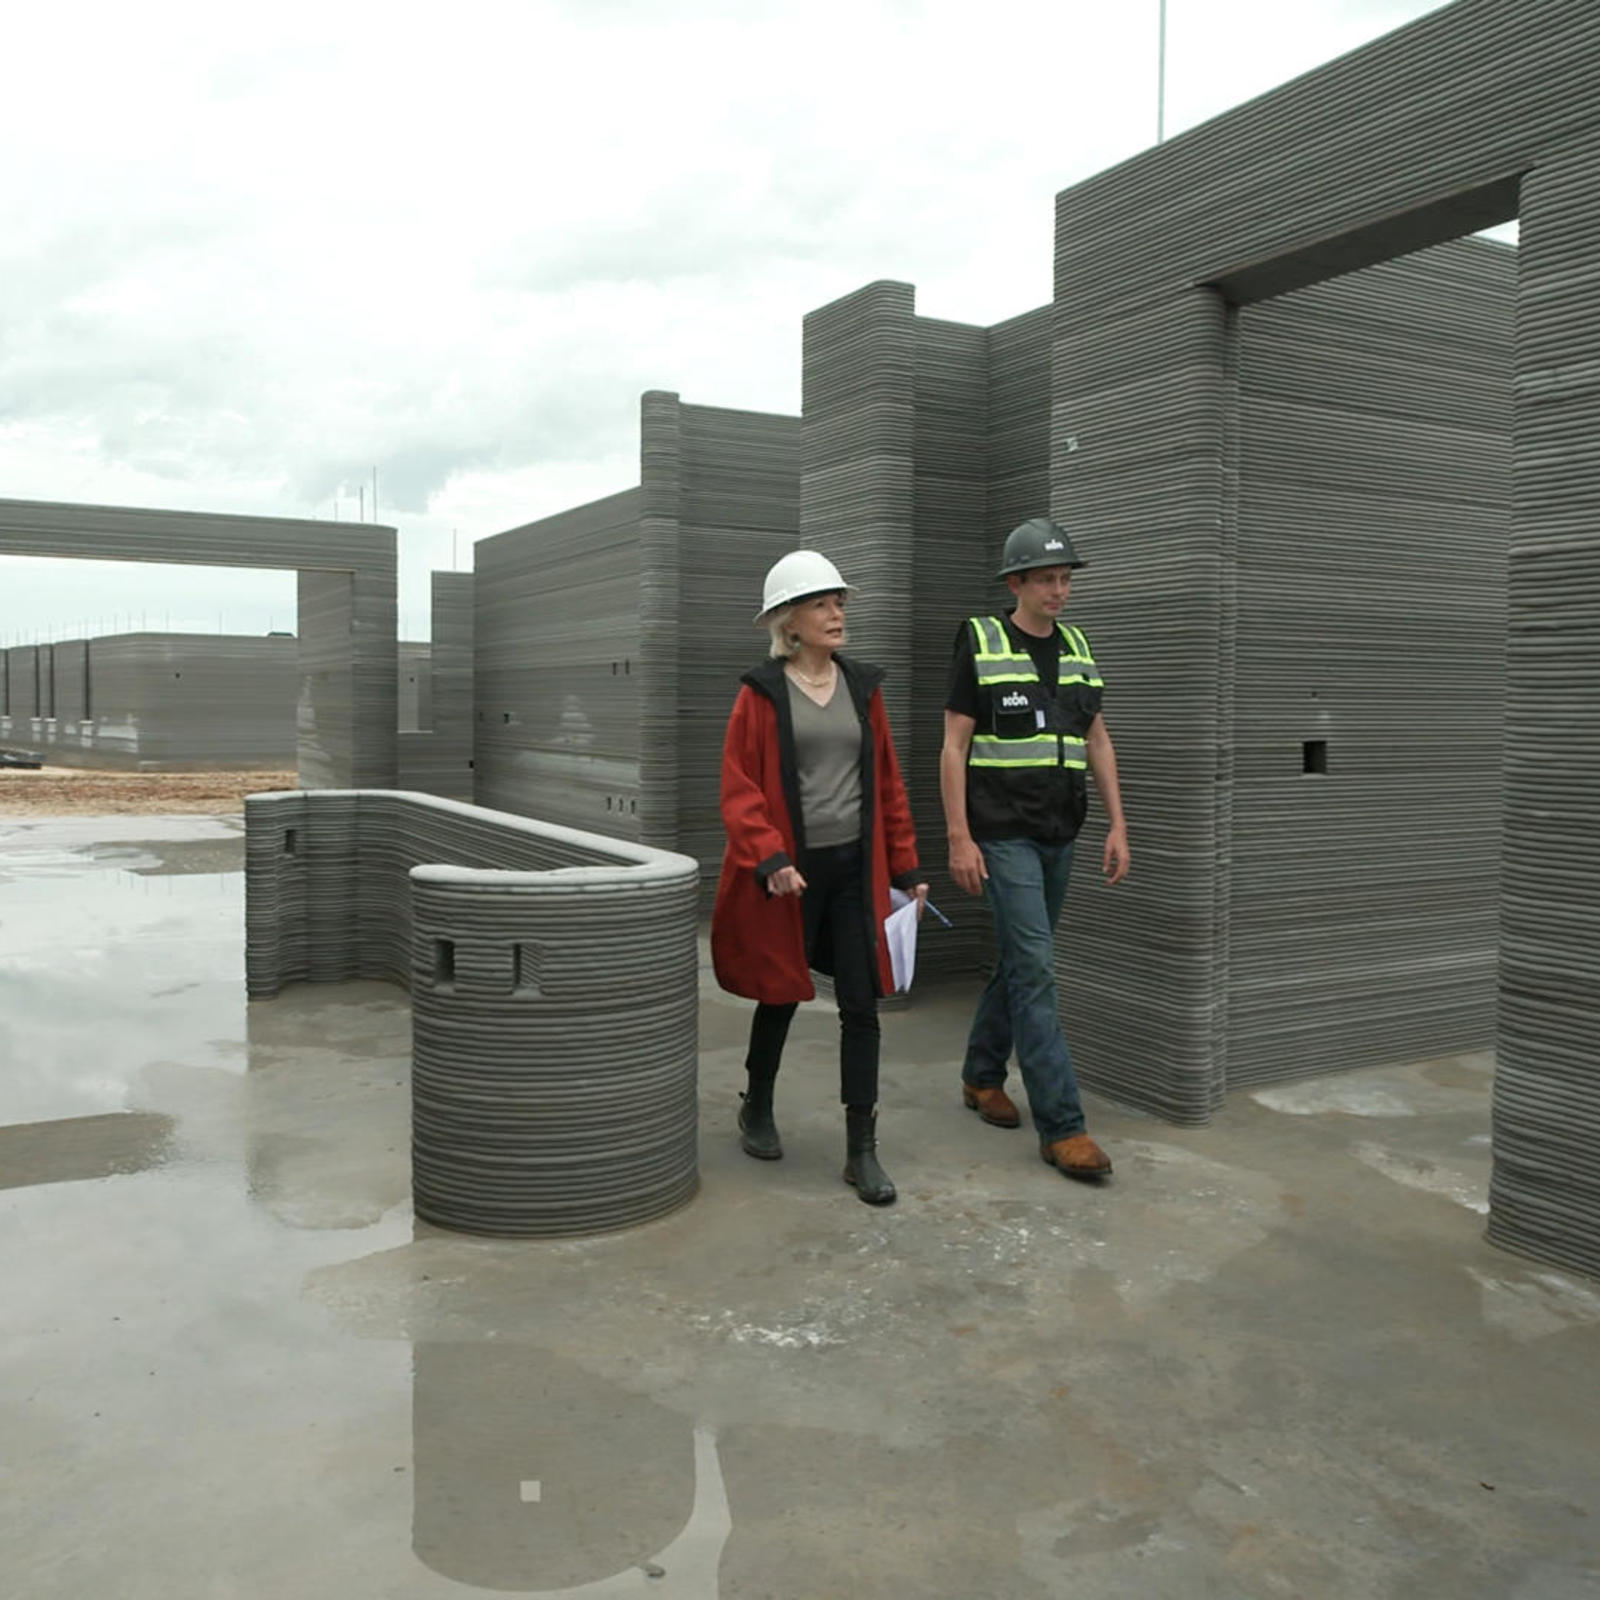 Can 3D-printed homes weather climate change?